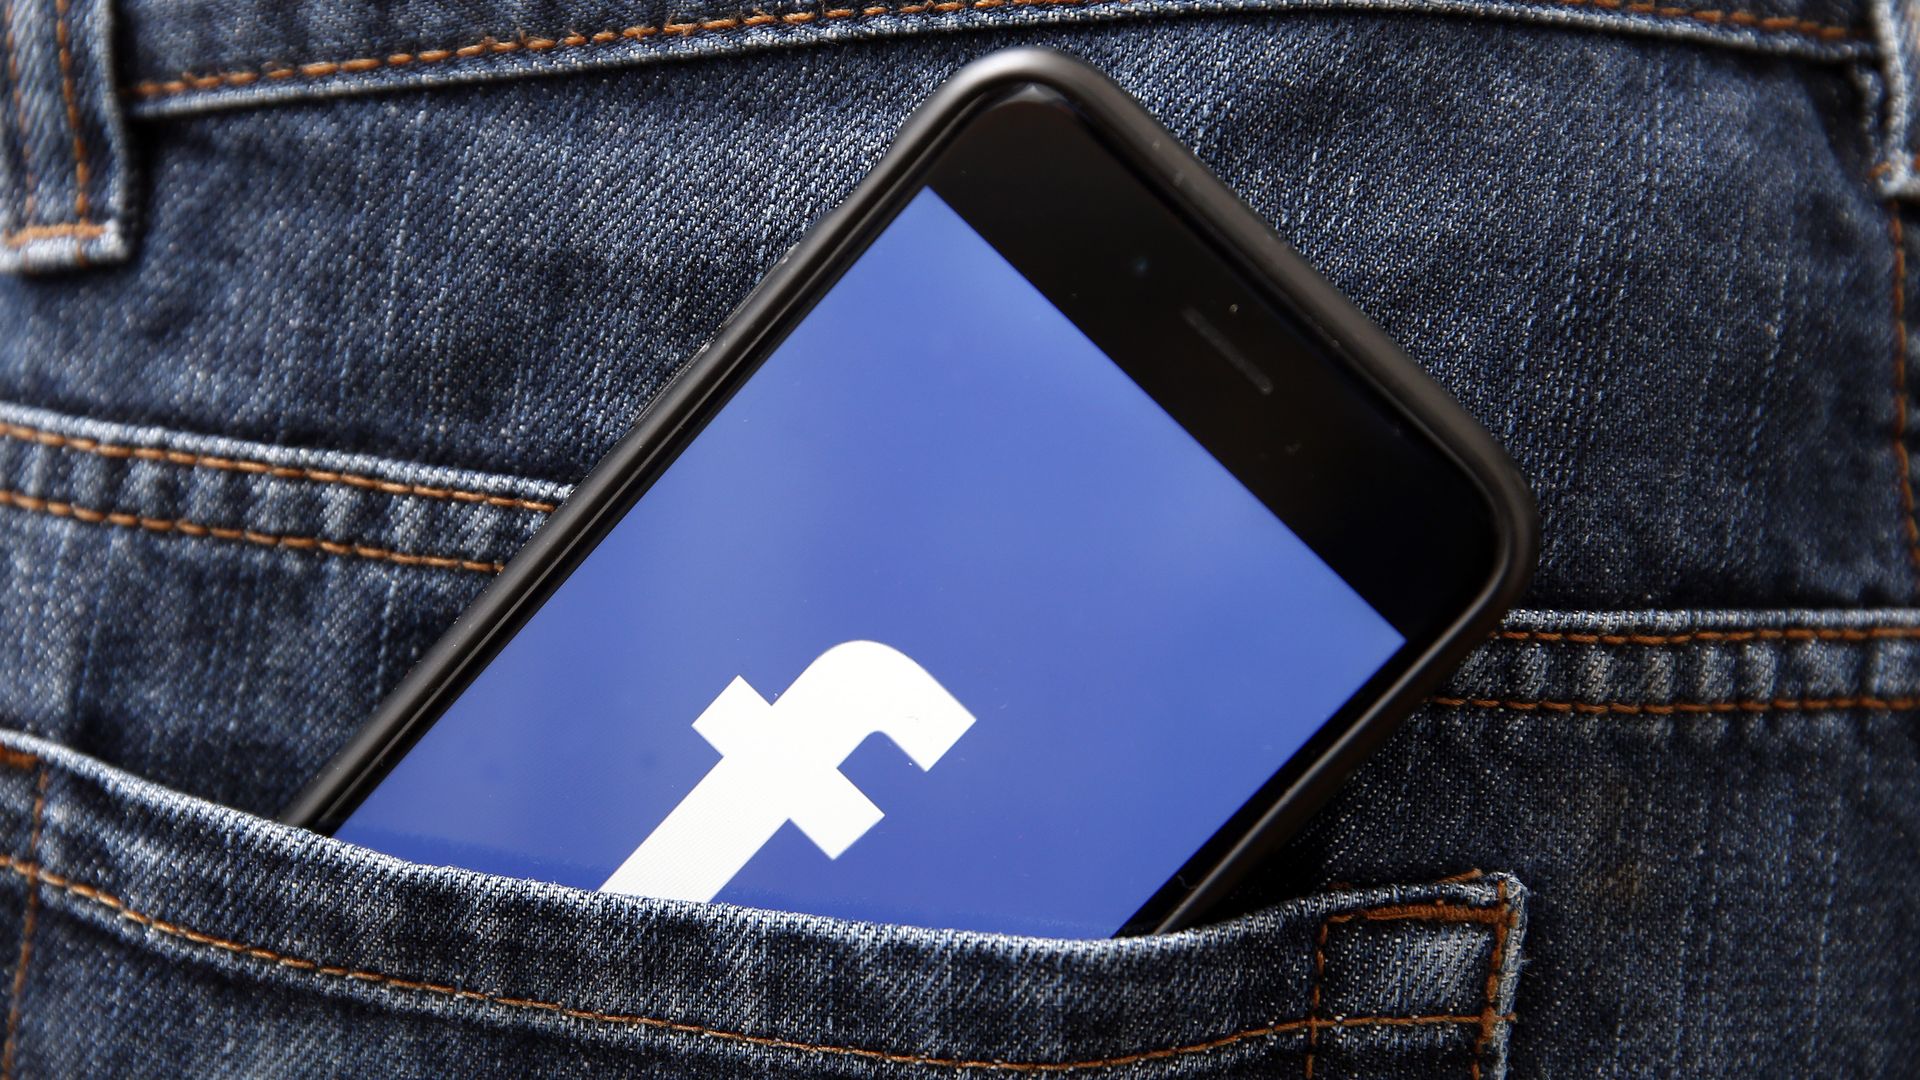 Facebook logo on an iPhone in a back jeans pocket